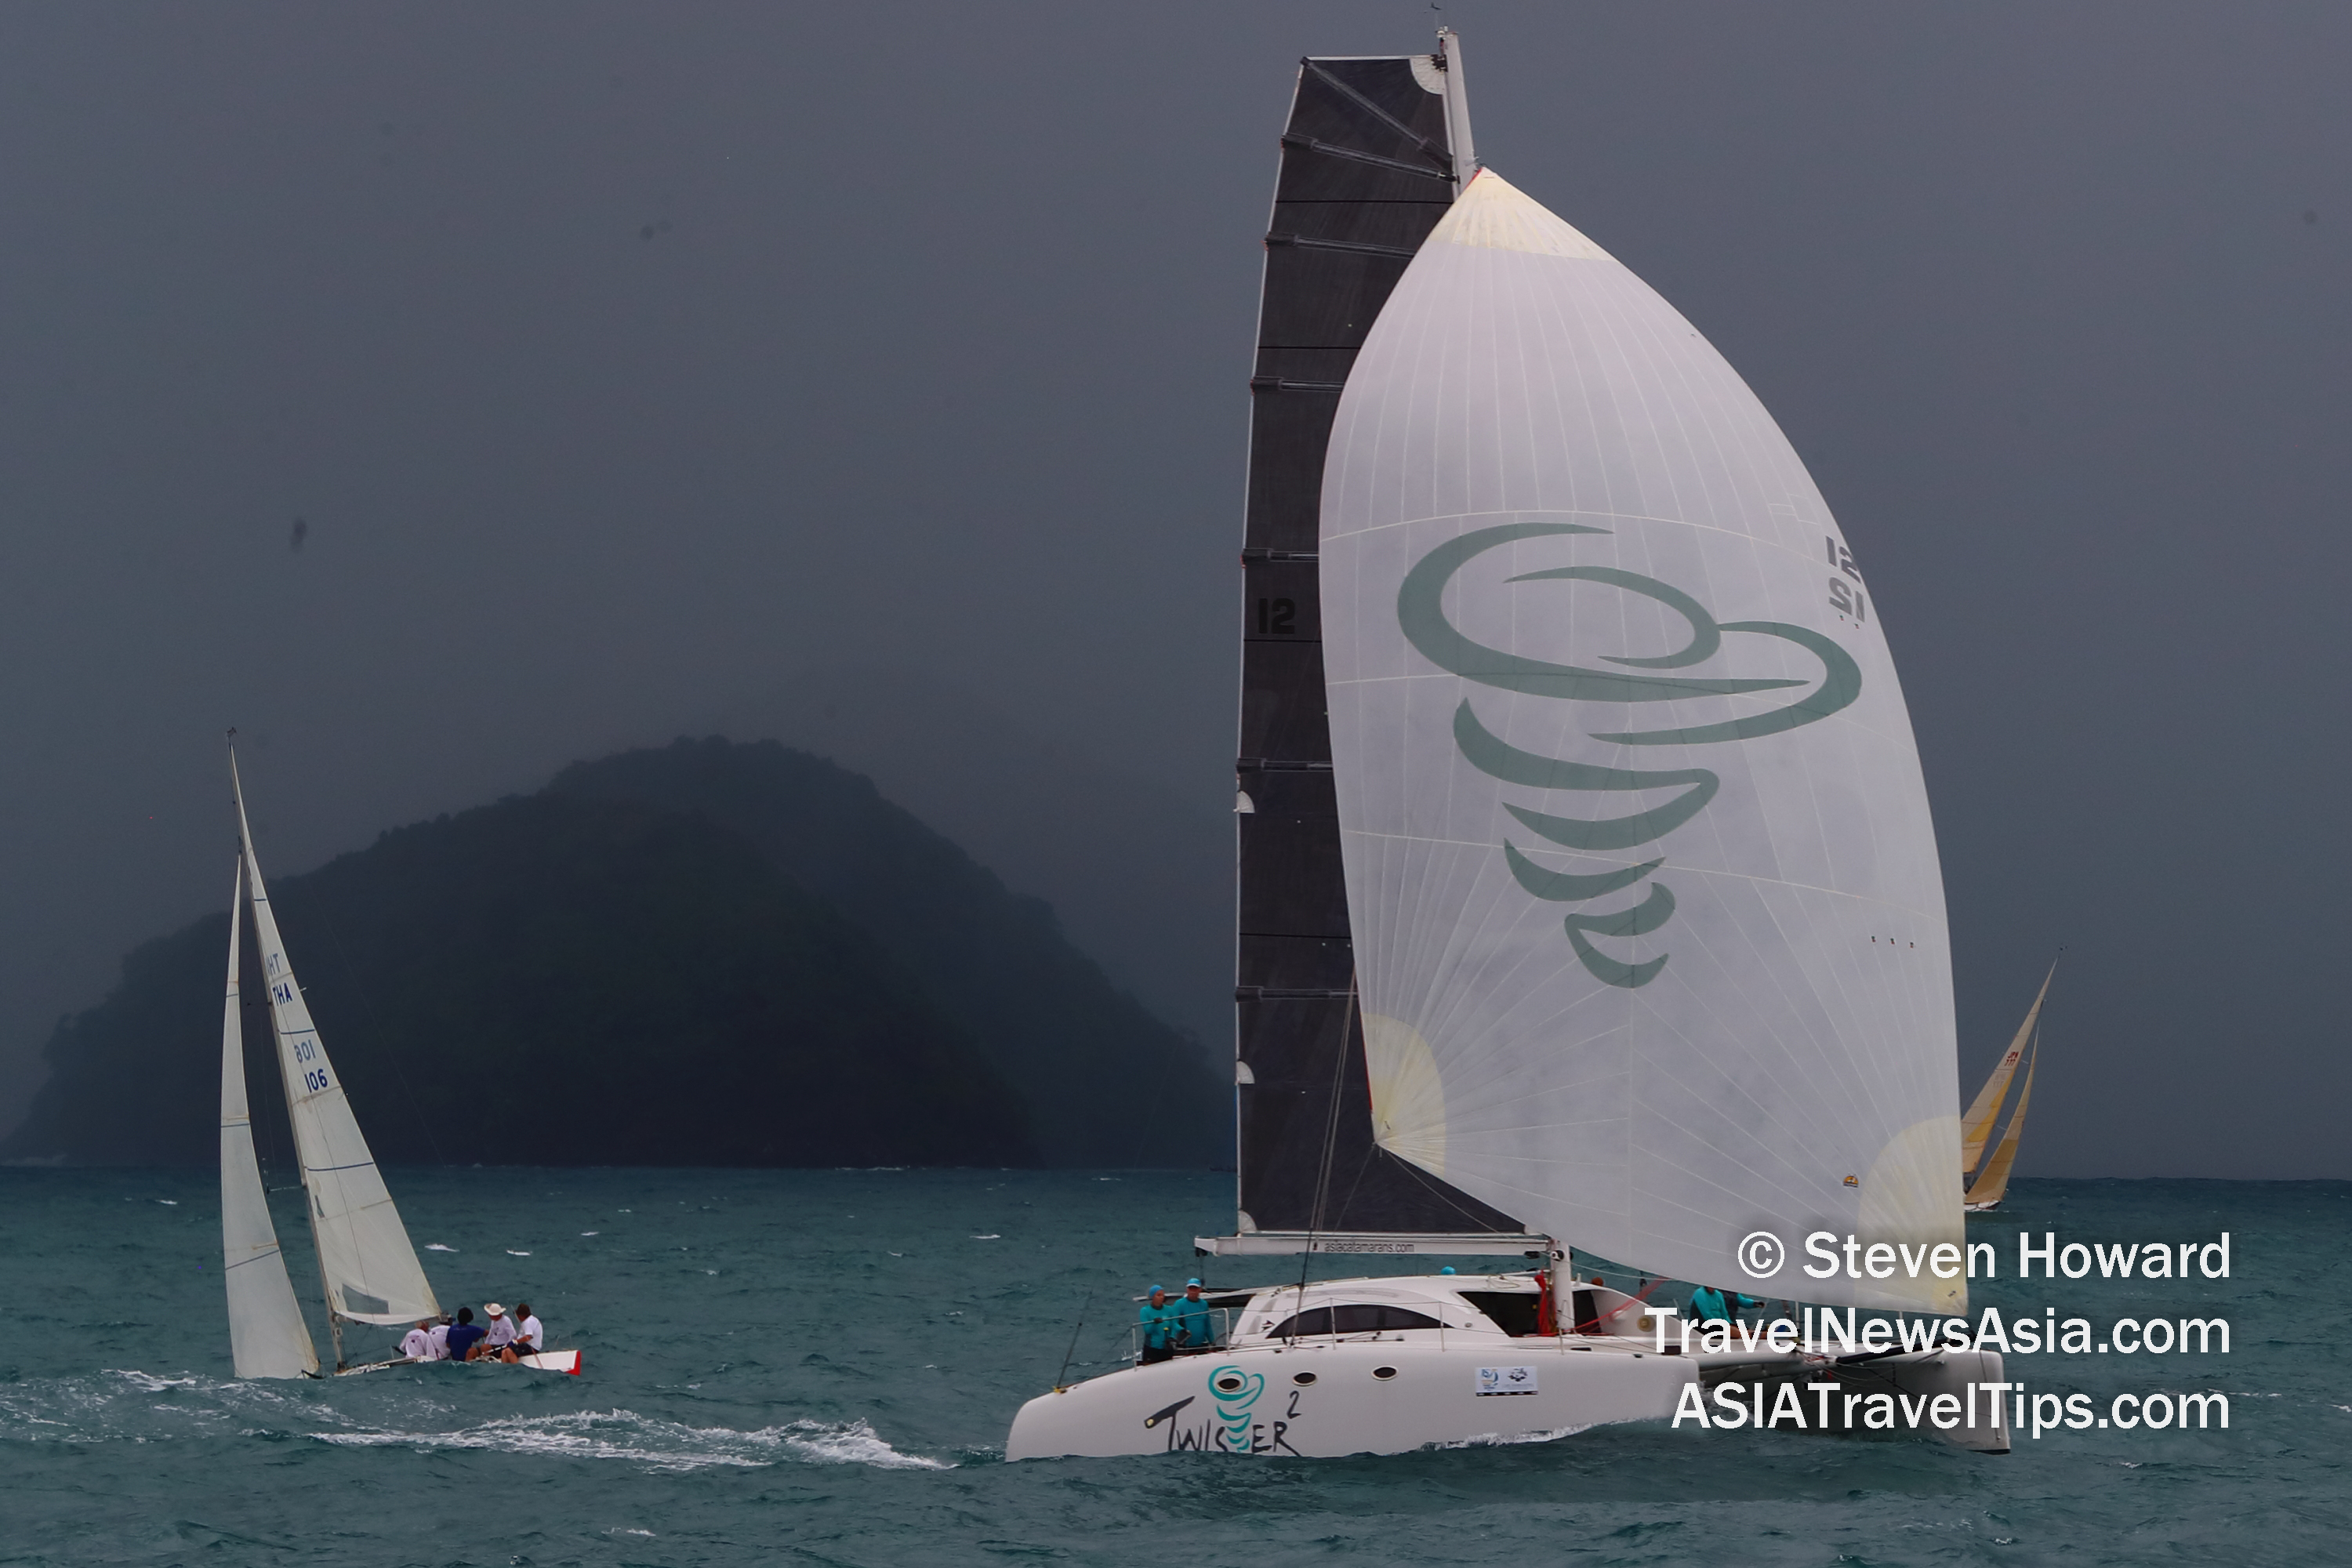 Action from the Cape Panwa Hotel Phuket Raceweek 2019. Picture by Steven Howard of TravelNewsAsia.com Click to enlarge.